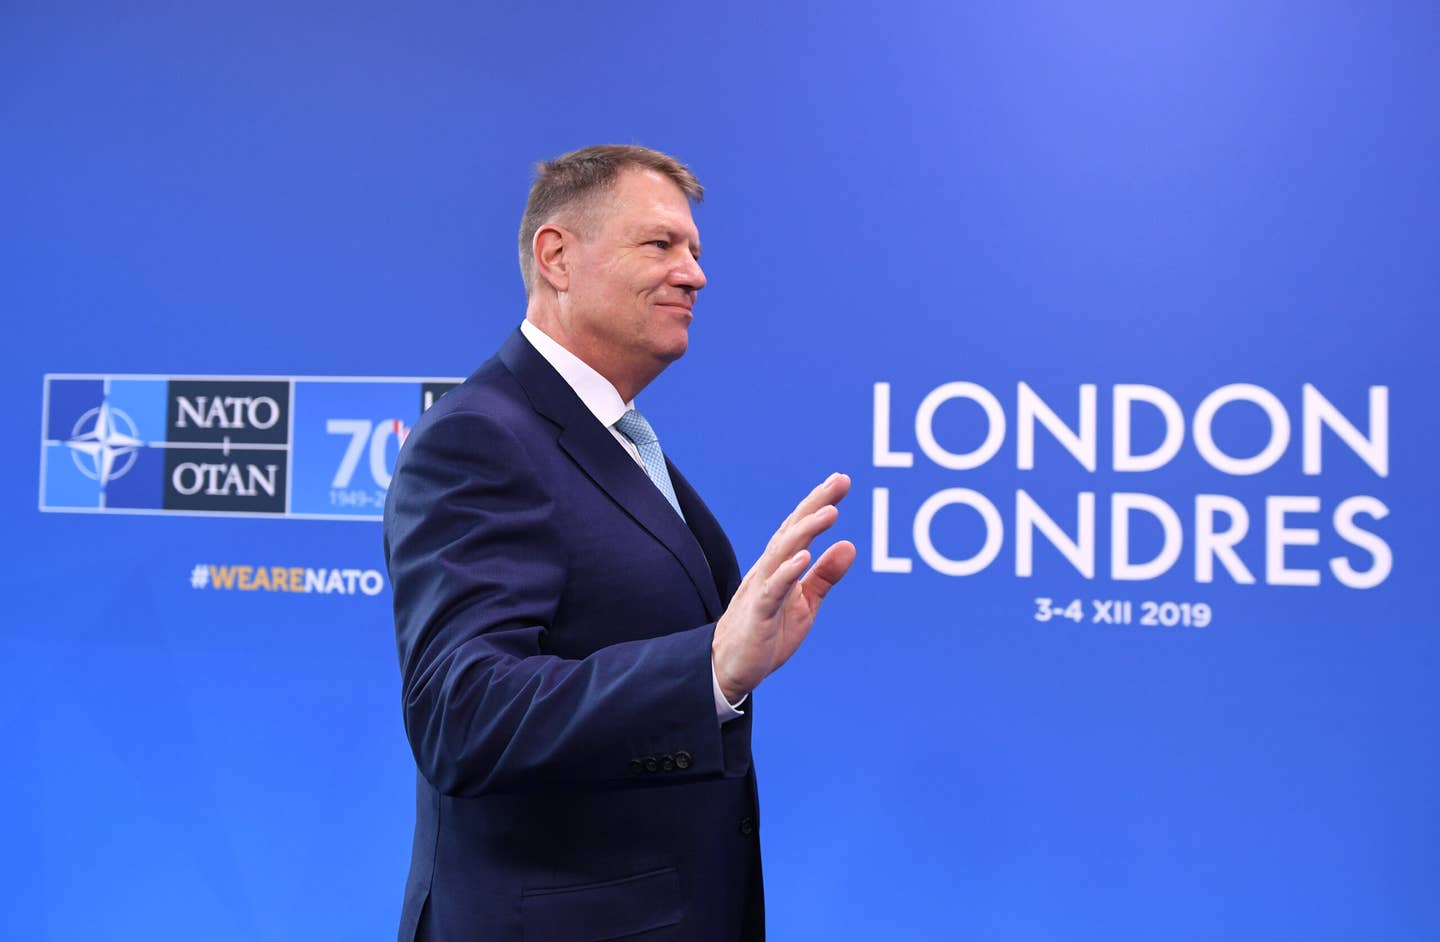 President of Romania, Klaus Lohannis arrives for the NATO summit in the United Kingdom in December 2019. <em>Photo by Chris J Ratcliffe/Getty Images</em>